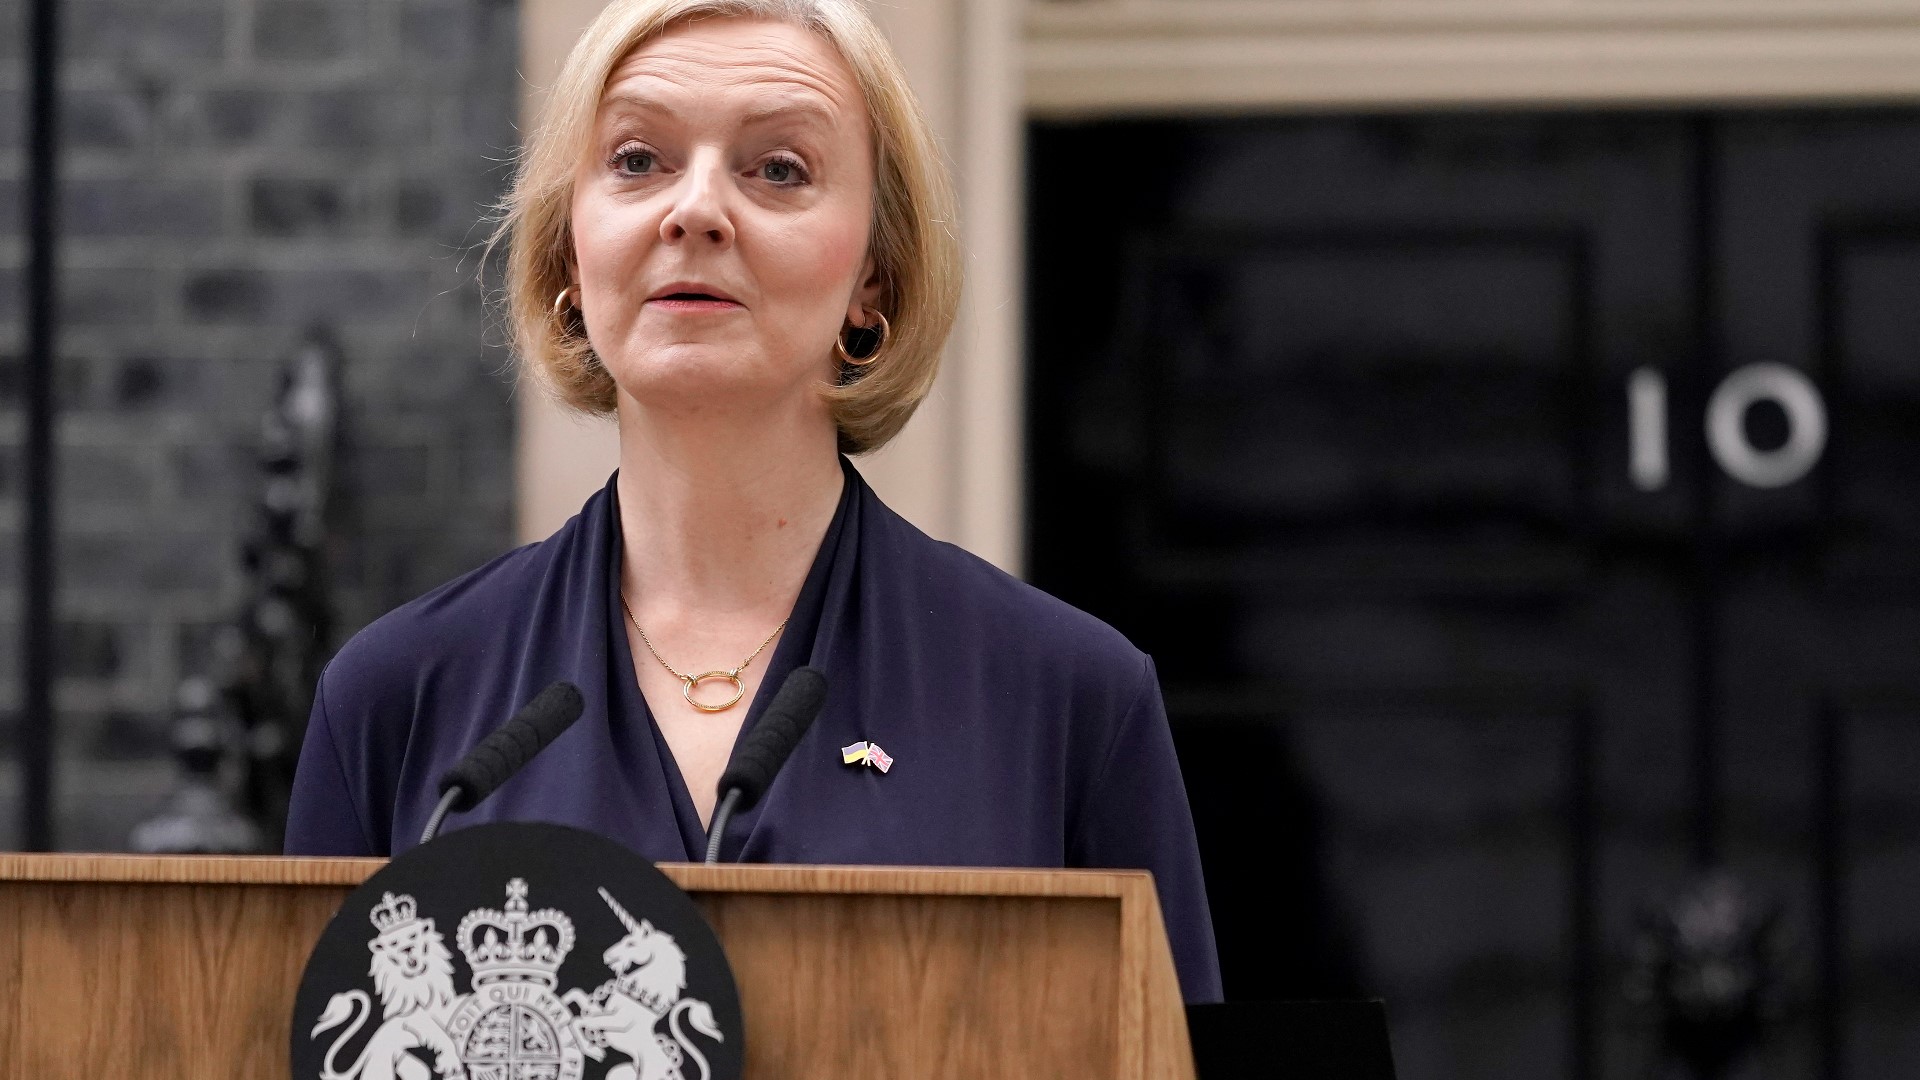 Truss' economic policies triggered turmoil in the markets and obliterated her authority in Parliament, spurring rebellion both in and outside of her party.